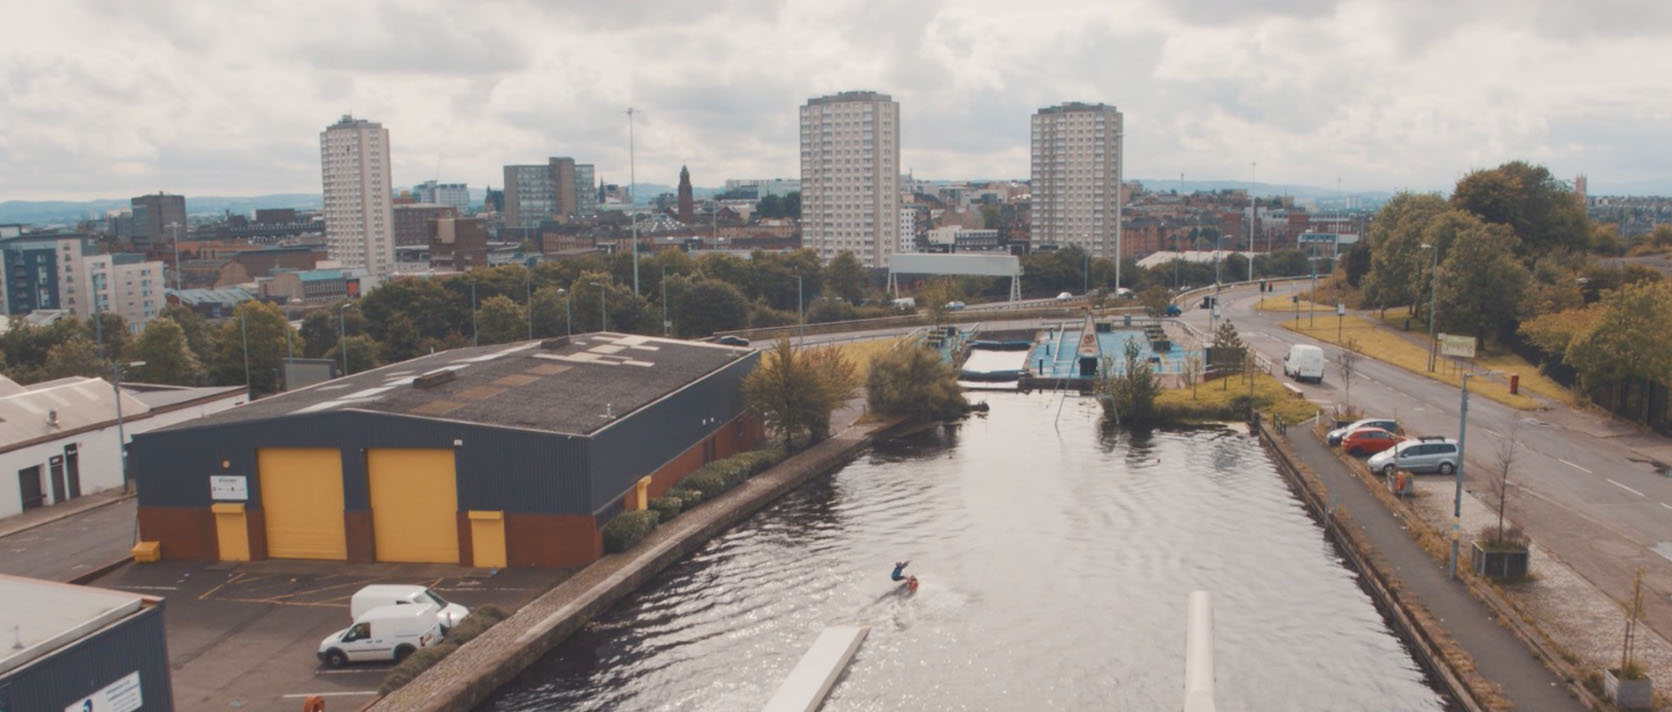 Glasgow Canal Project - Wakeboard Wake Park Drone Video